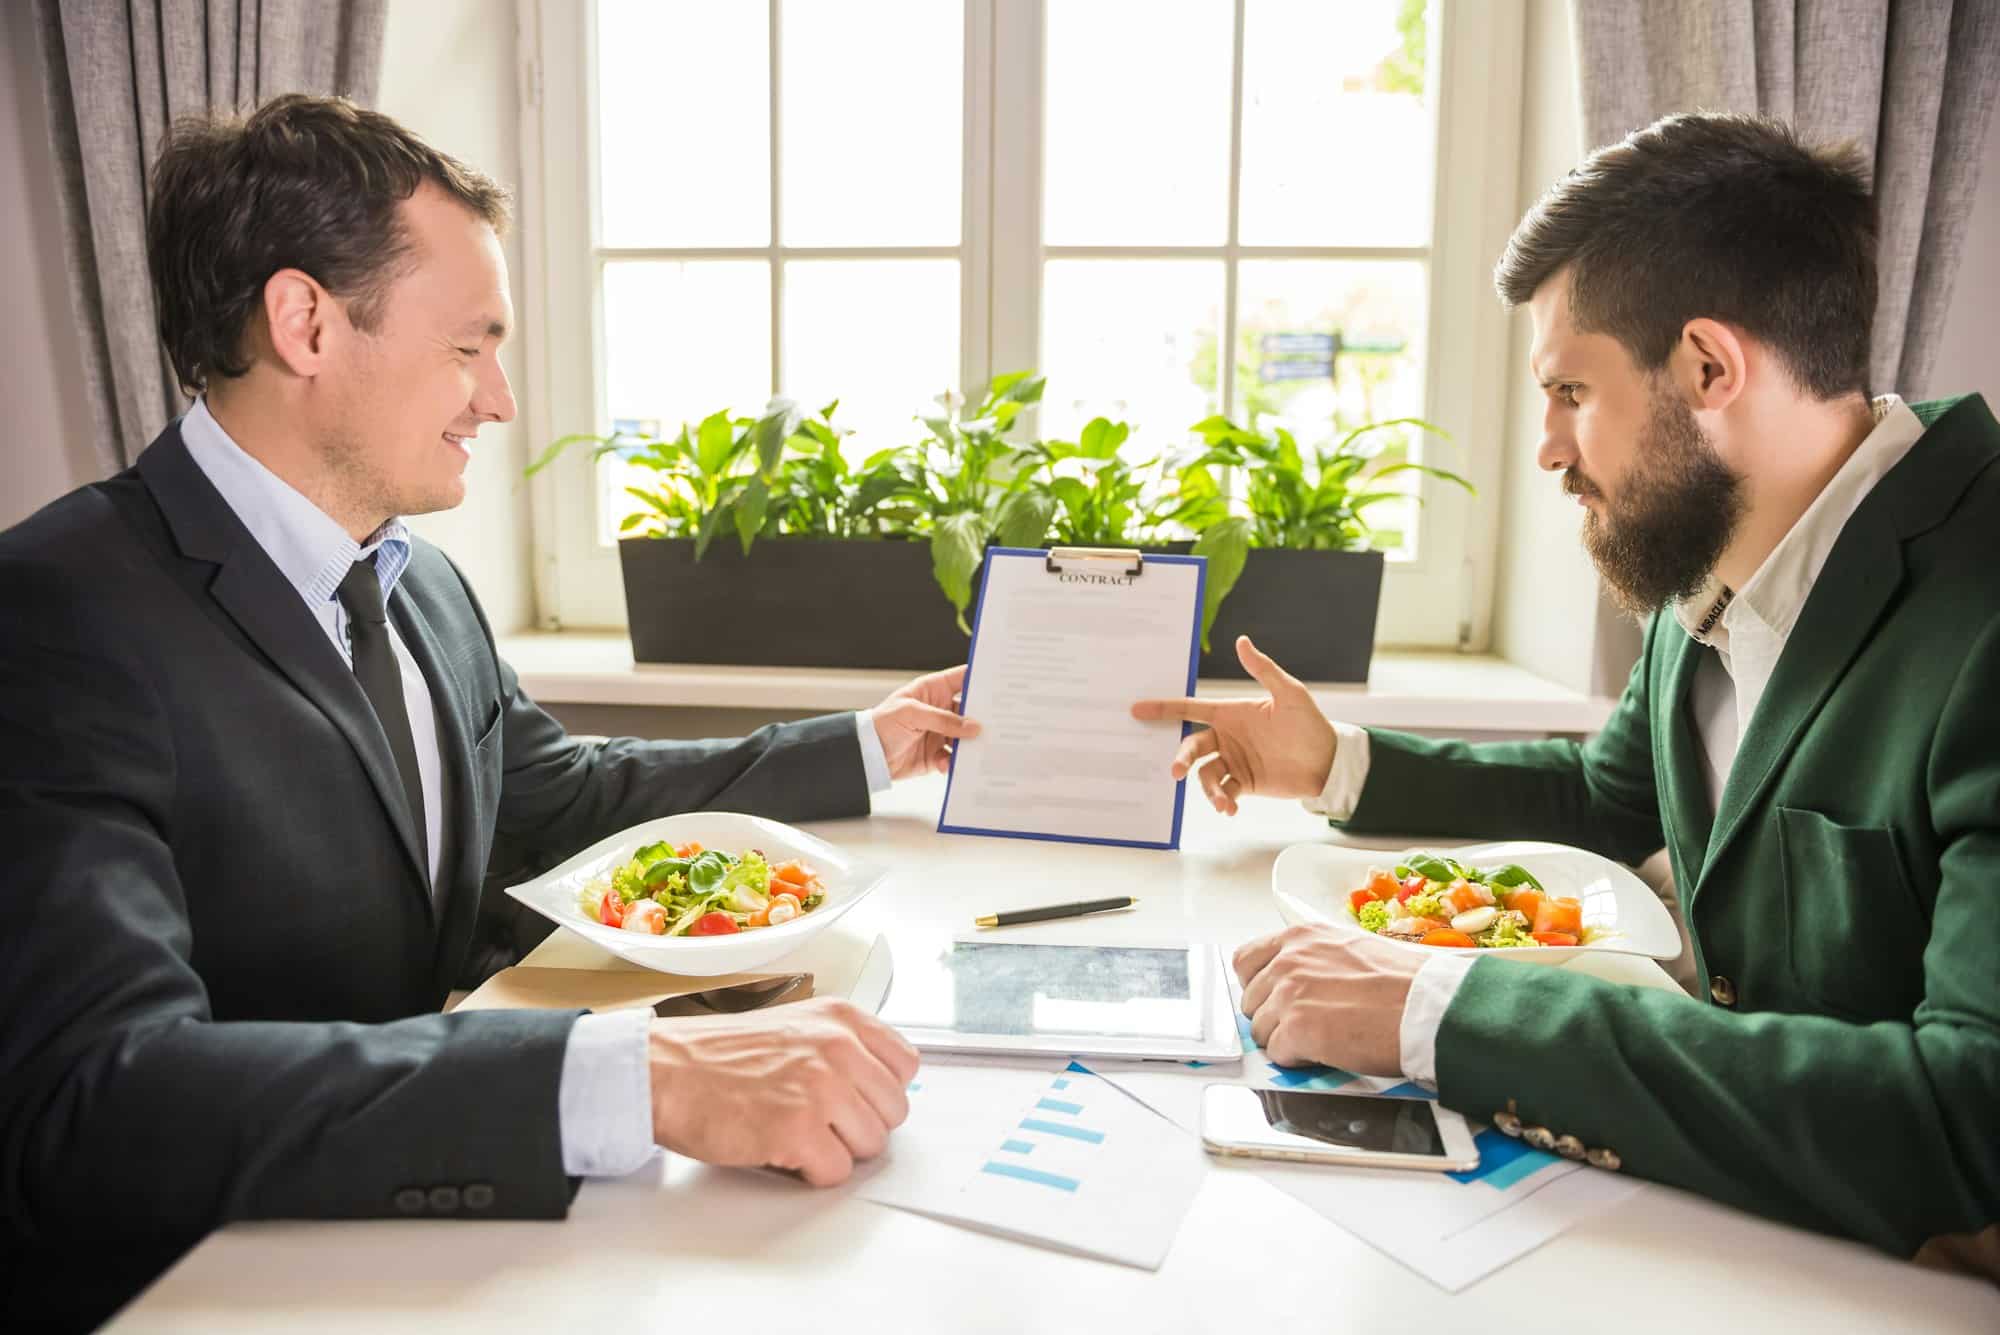 Two men seated at the restaurant when every forkful matters during a business lunch dressed in suit and tie with their salads in front of them while one is presenting a document to the other